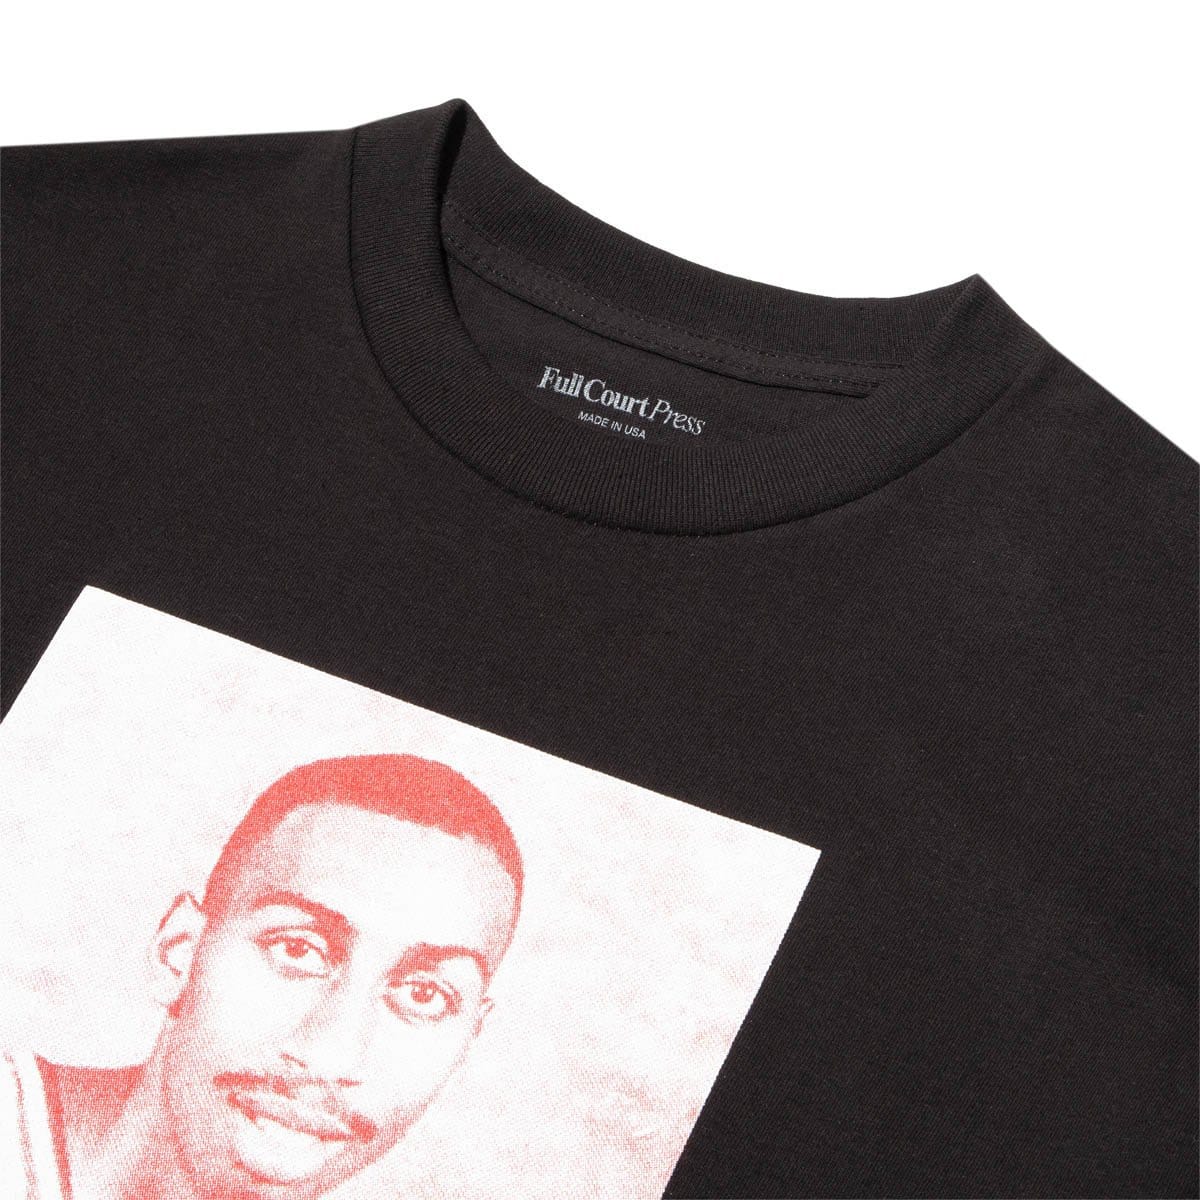 Full Court Press T-Shirts SMITH TEE